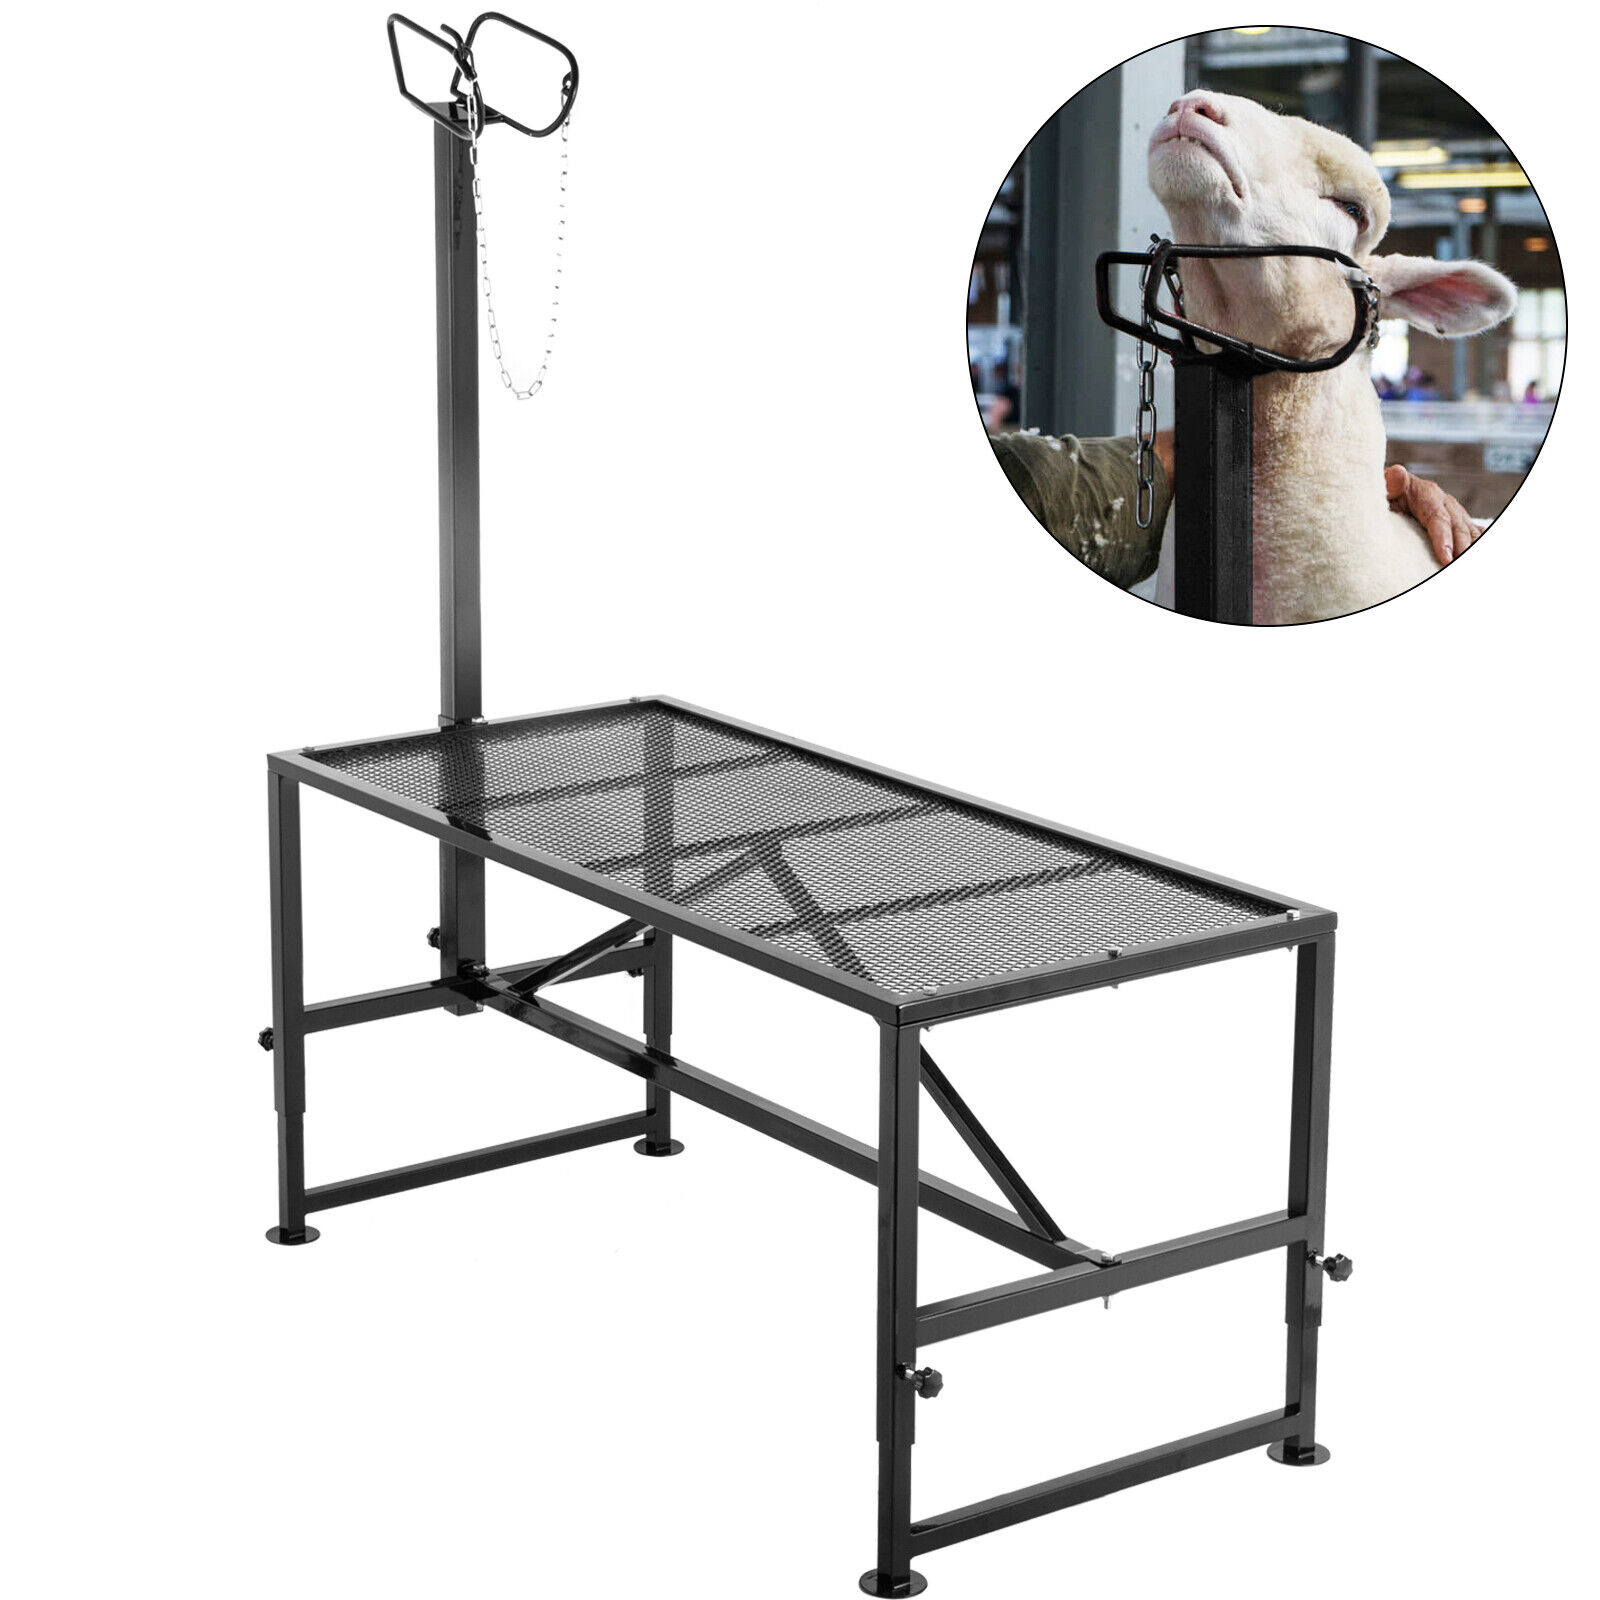 VEVOR Livestock Stand, Trimming Stand 51x23“ Livestock Trimming Stands for Goats